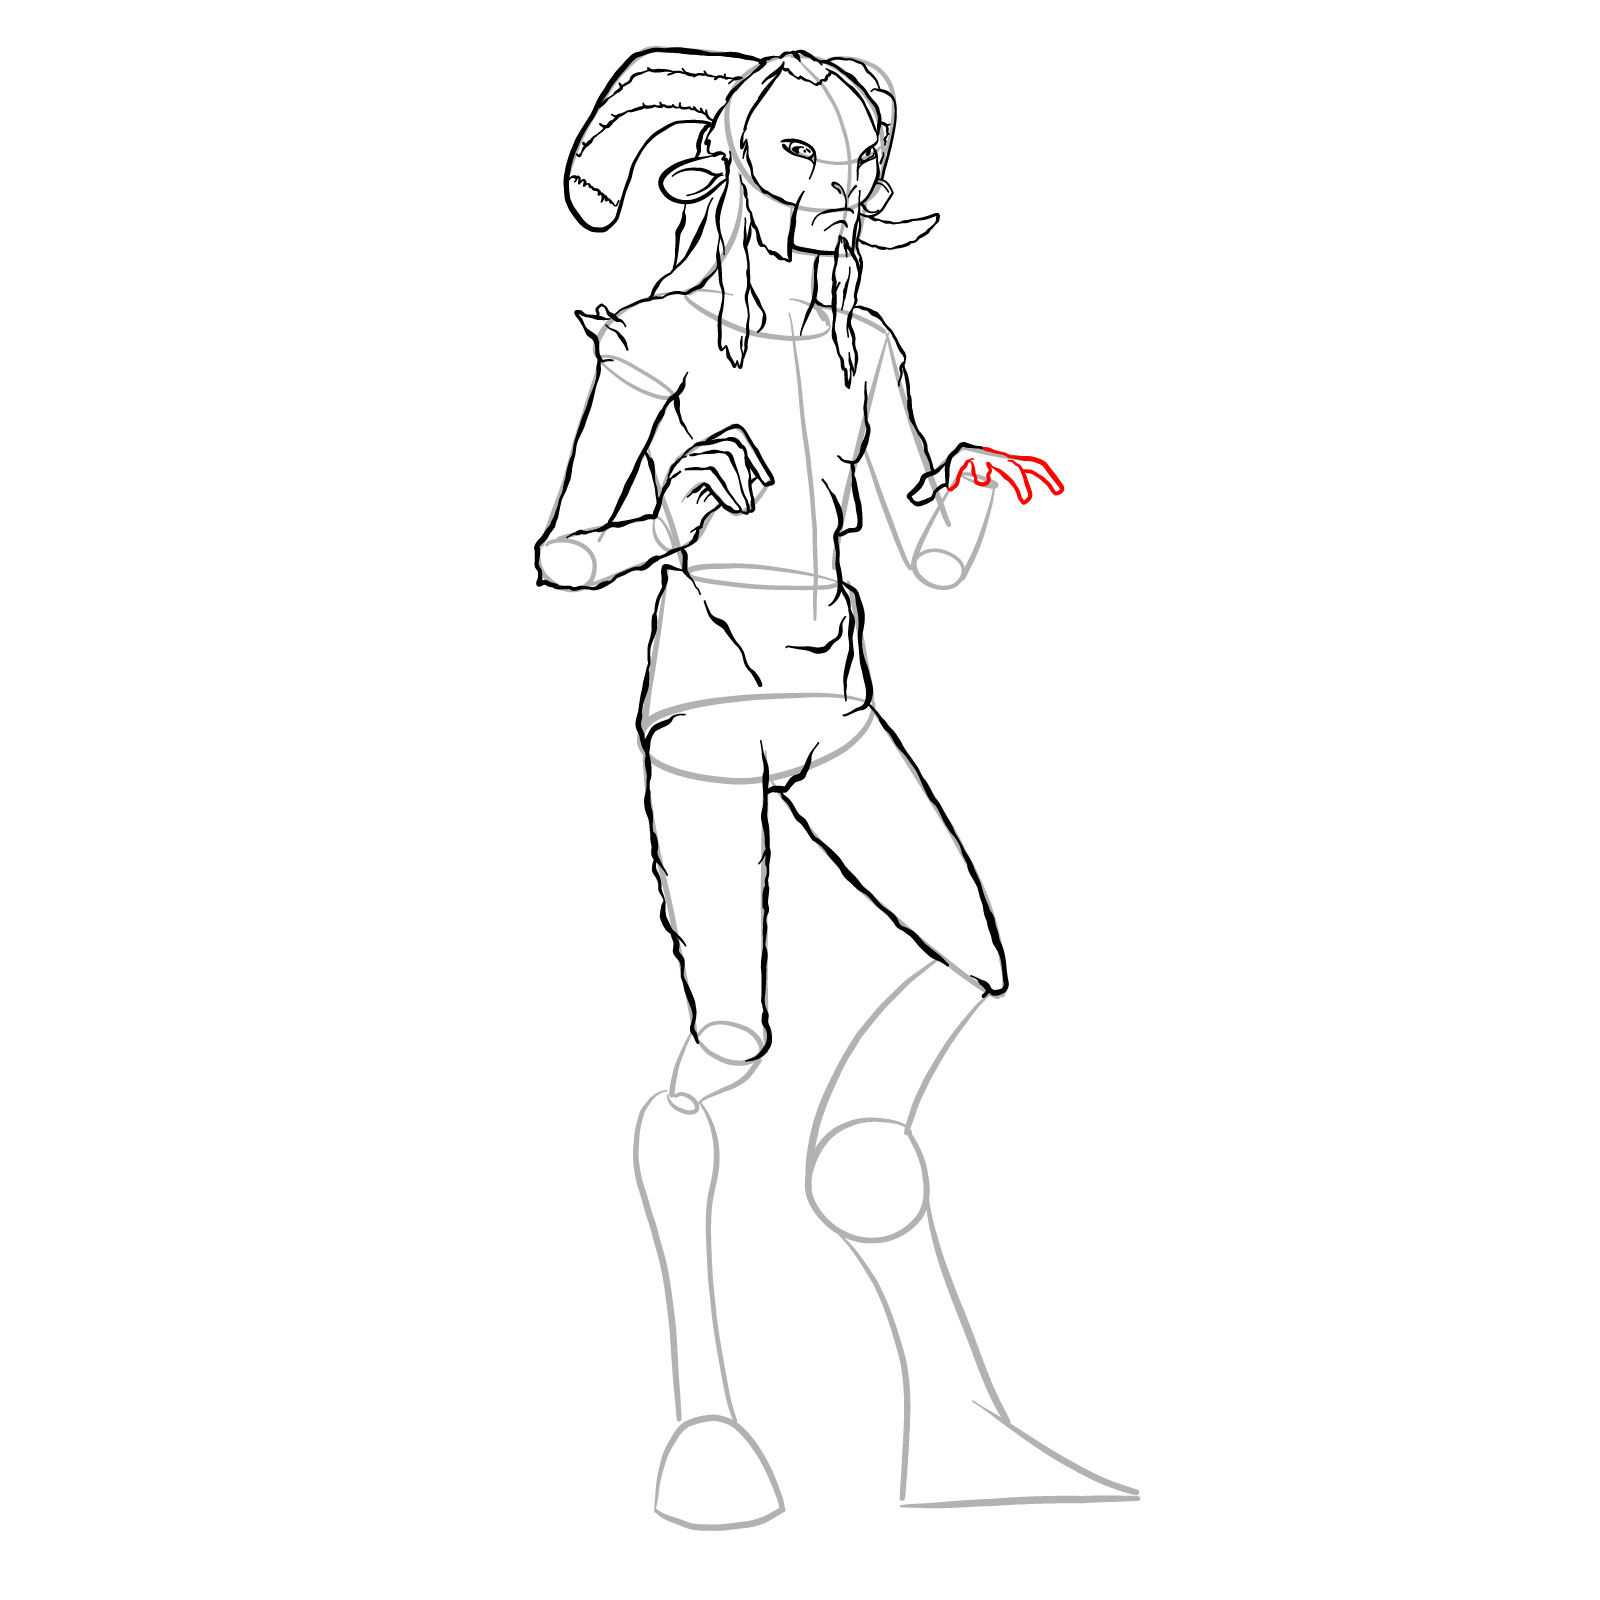 How to draw a Faun - step 25